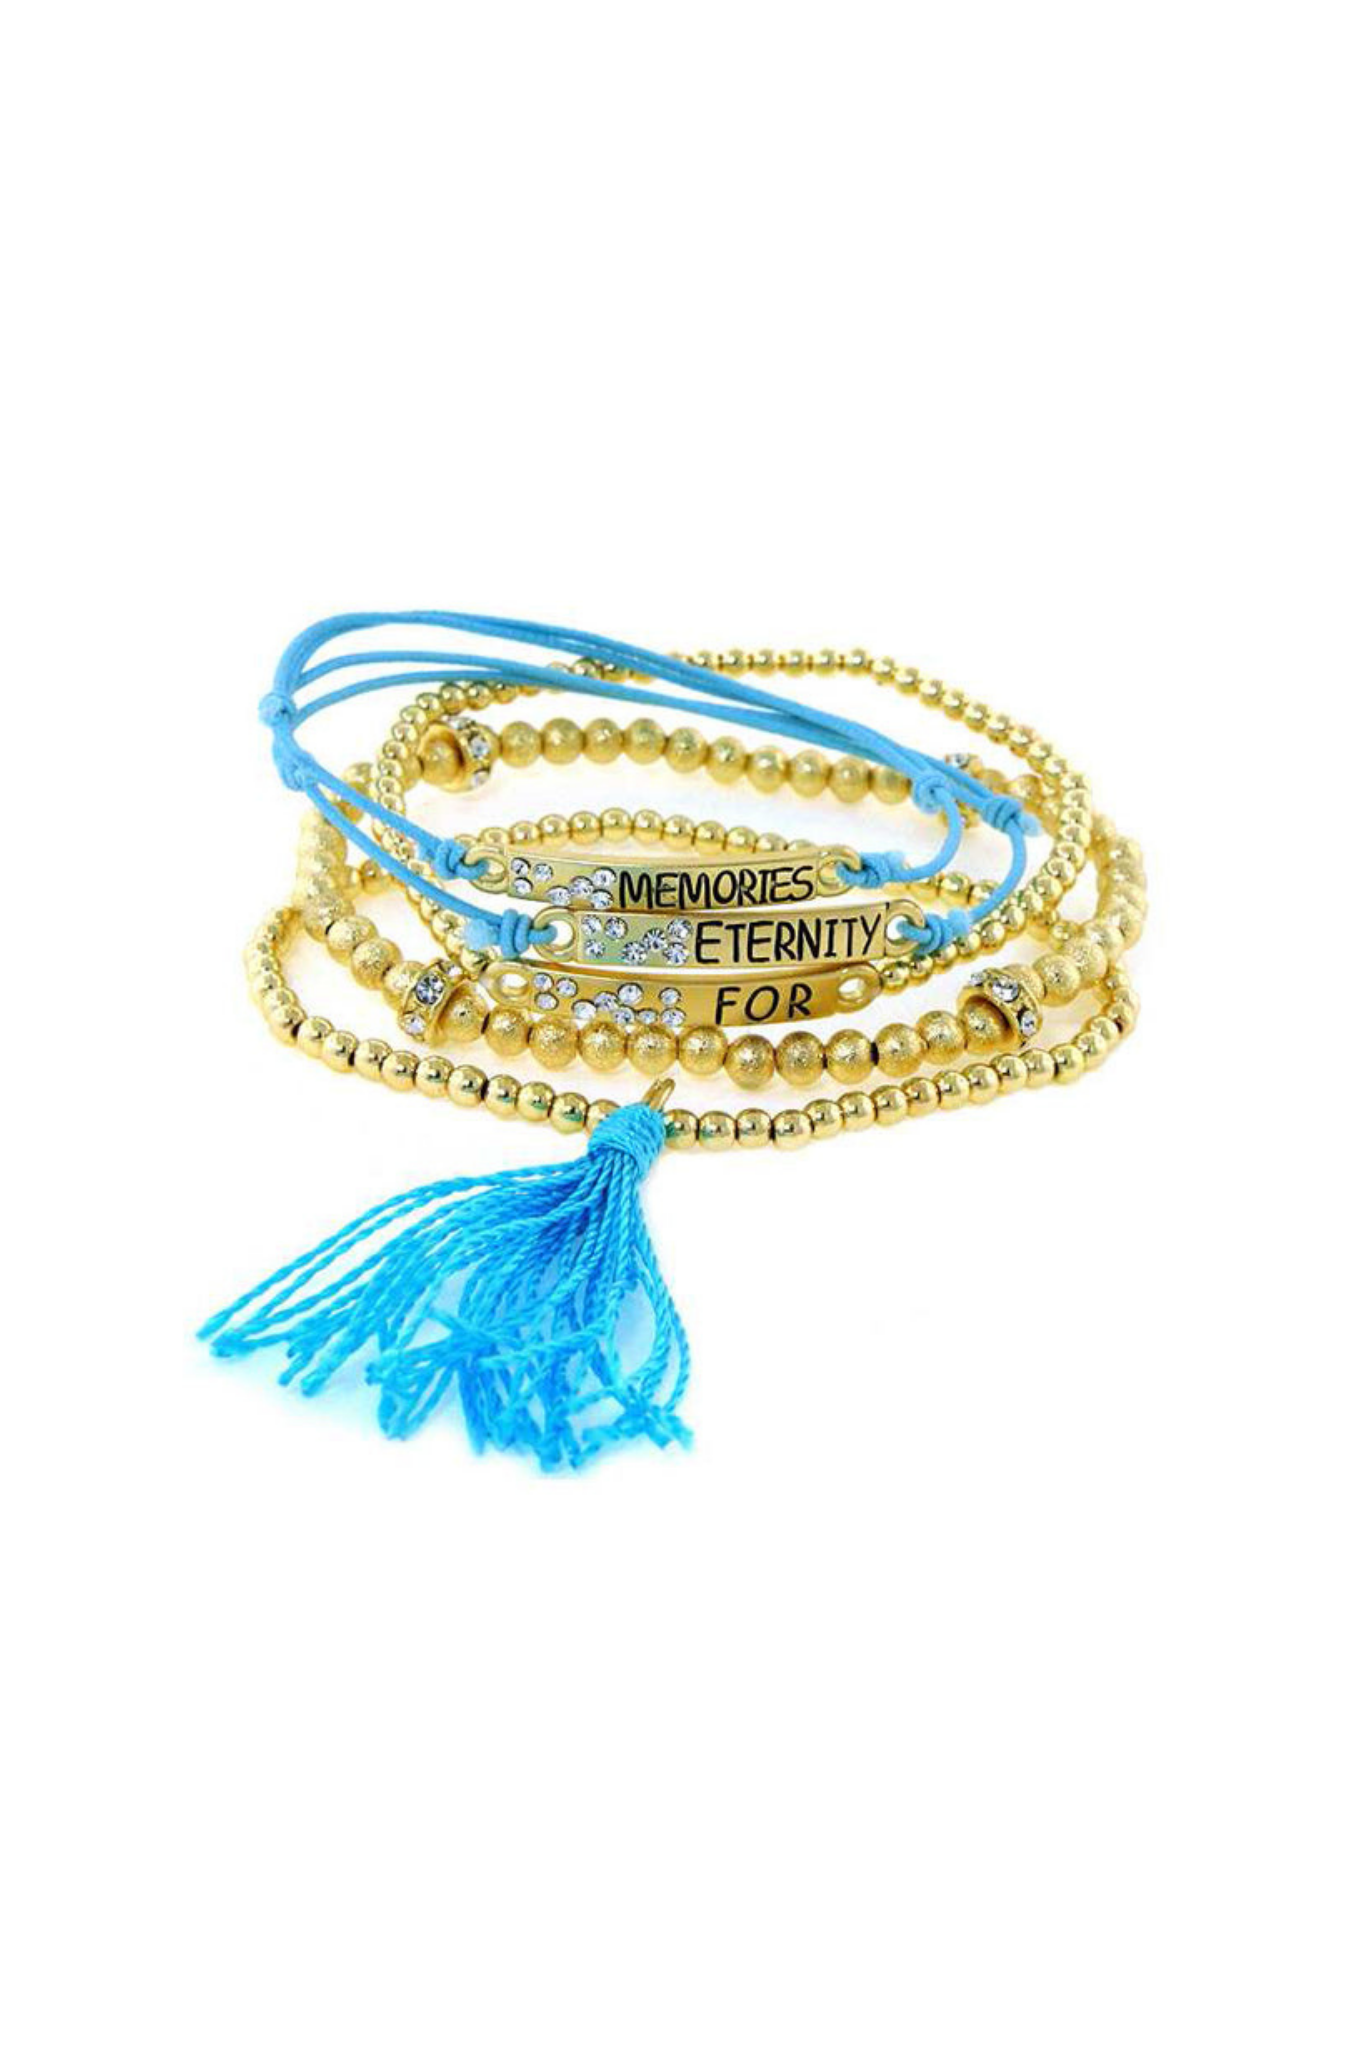 "Memories For Eternity" Bracelet with Gold Beads and Blue Tassel - Set of 5